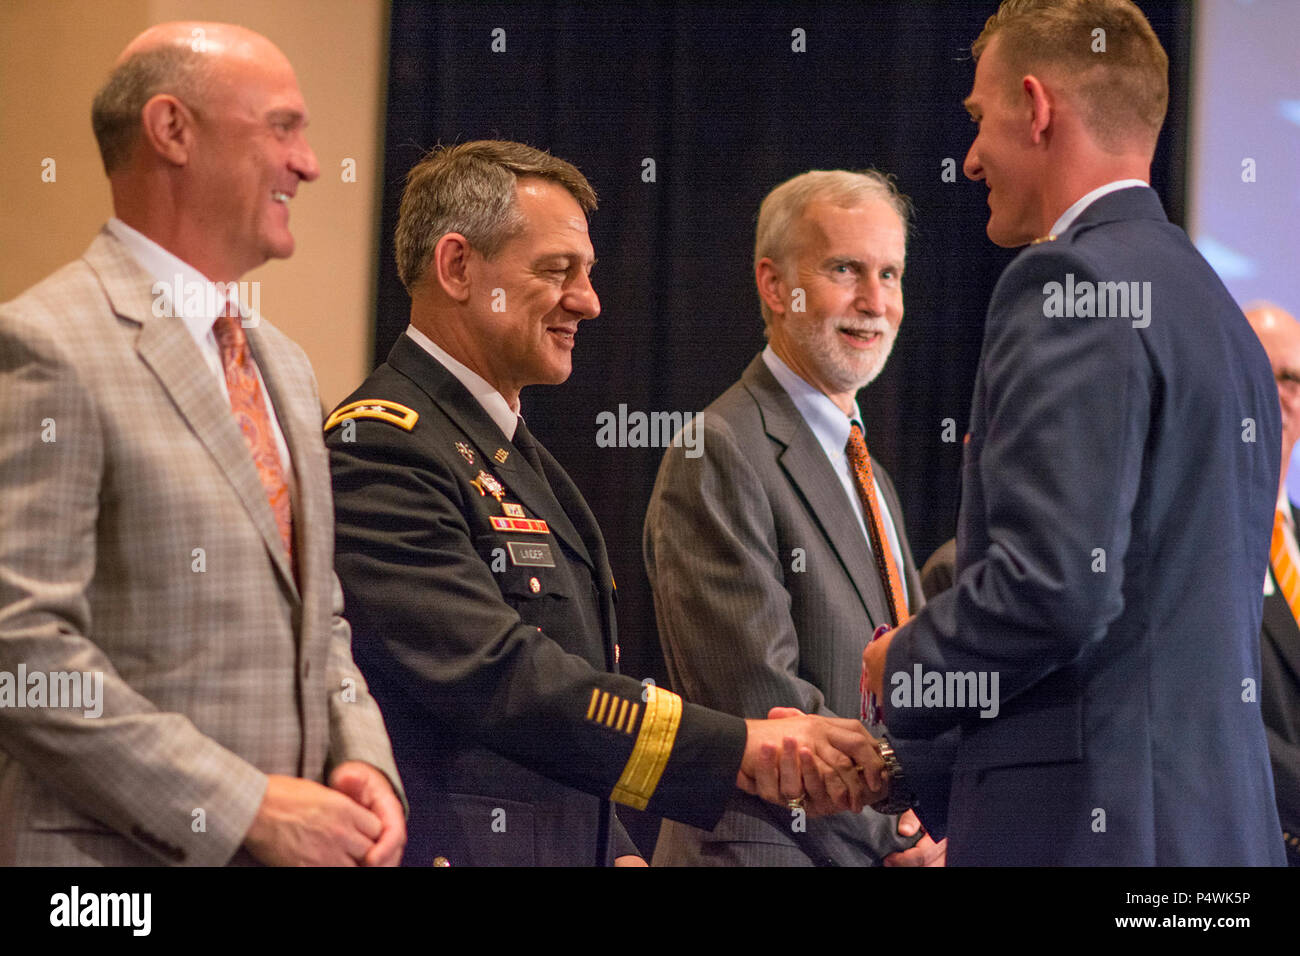 U.S. Army Maj. Gen. James B. Linder, commander of the U.S. Army John F. Kennedy Special Warfare Command, congratulates brand new 2nd Lt. Sean Mac Lain during Clemson University’s Reserve Officers’ Training Corps commissioning ceremony, May 10, 2017. Mac Lain was a member of both the 2016 Clemson Tigers National Football Championship team and the Clemson ROTC Pershing Rifles 2016 national champion drill and ceremony team. Stock Photo